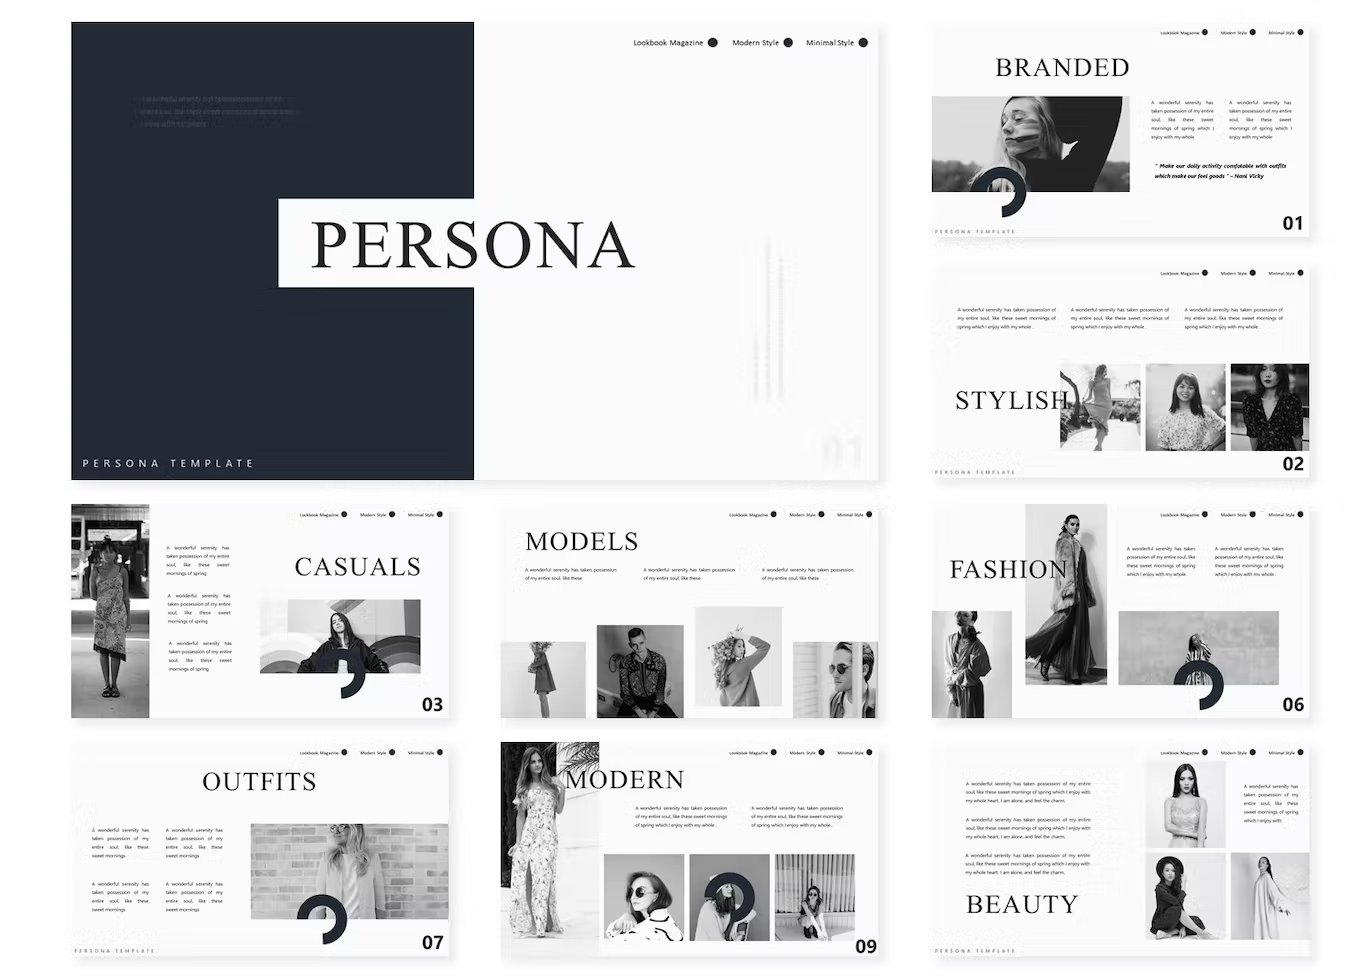 Black and white slides on the subject of persona.